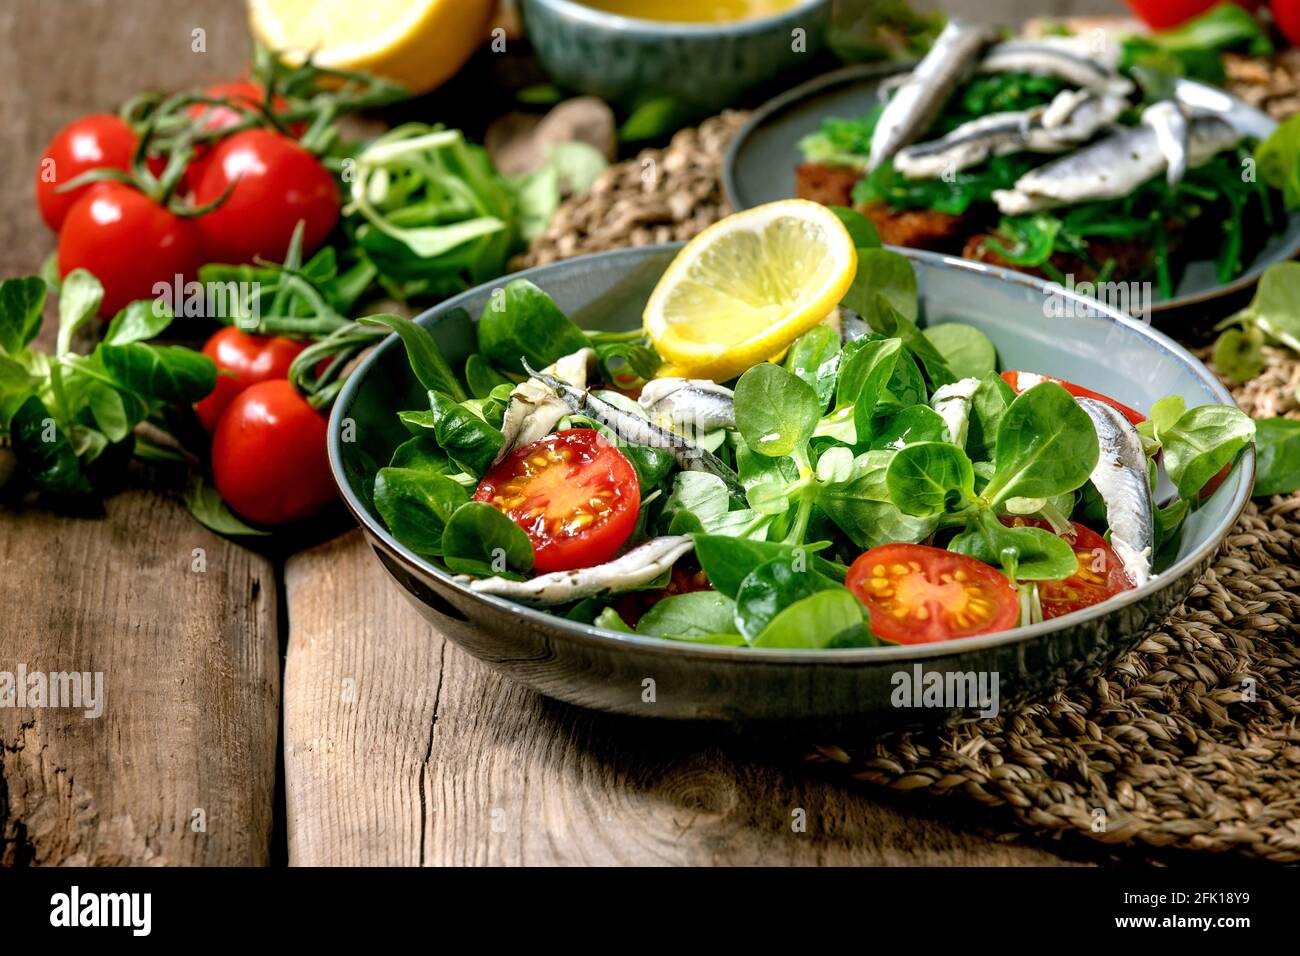 Green field salad with pickled anchovies or sardines fillet, and cherry tomatoes, served in blue bowl with lemon and olive oil on straw napkin over ol Stock Photo